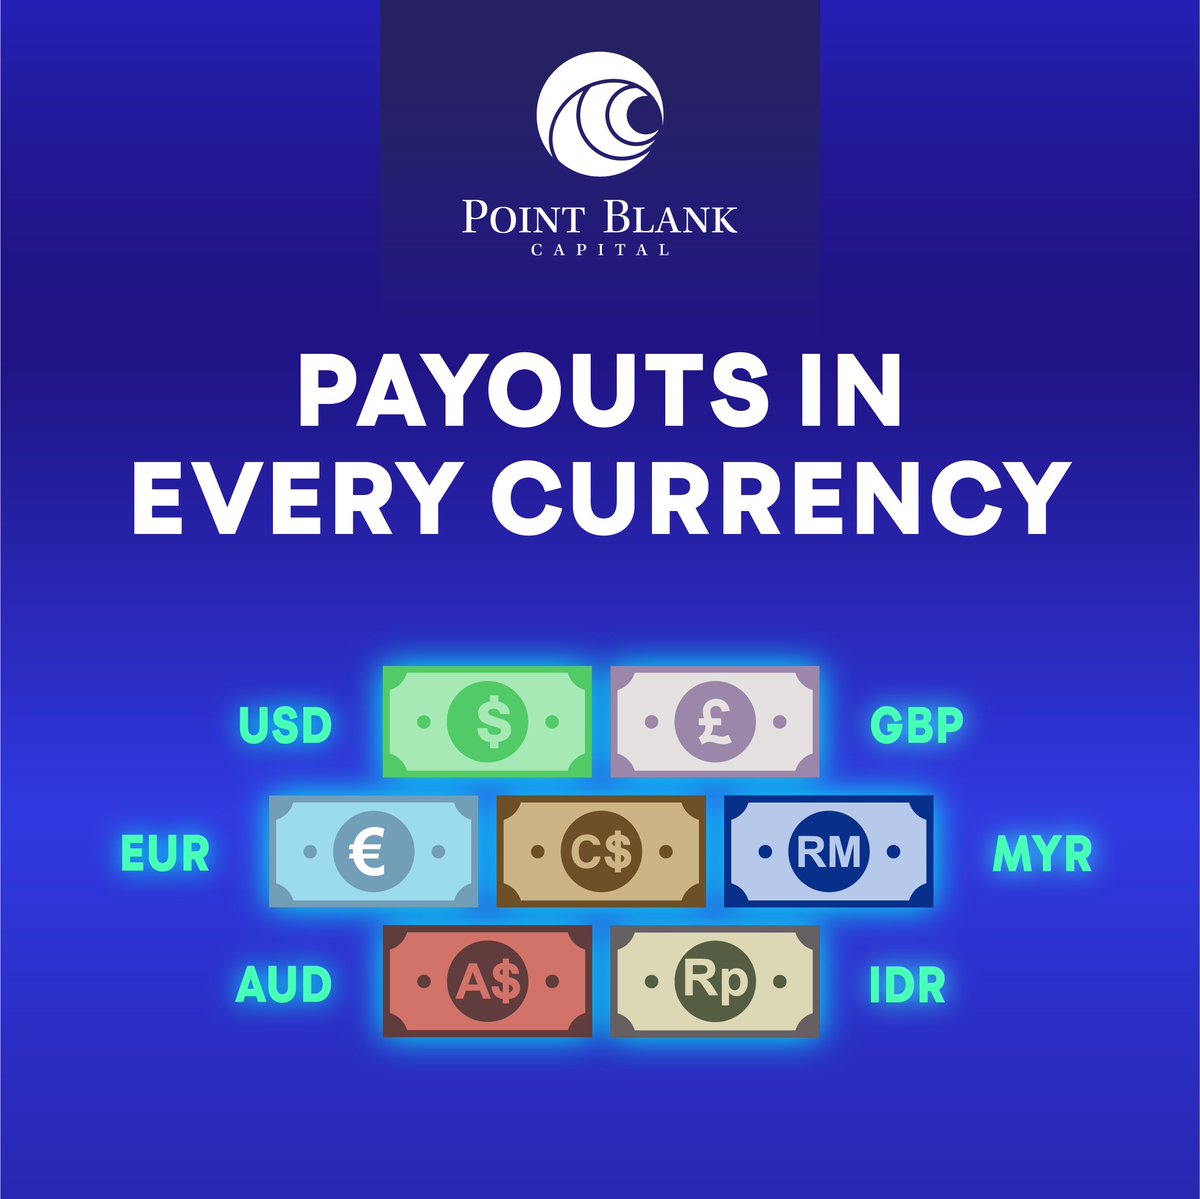 You have the freedom to withdraw your payout in any currency of your preference. Select the currency that best suits your needs and enjoy the rewards of your dedication.

#pointblankcap #markets #tradingsuccess #forex #forextrading #daytrading #trading #trader #forexchallenge